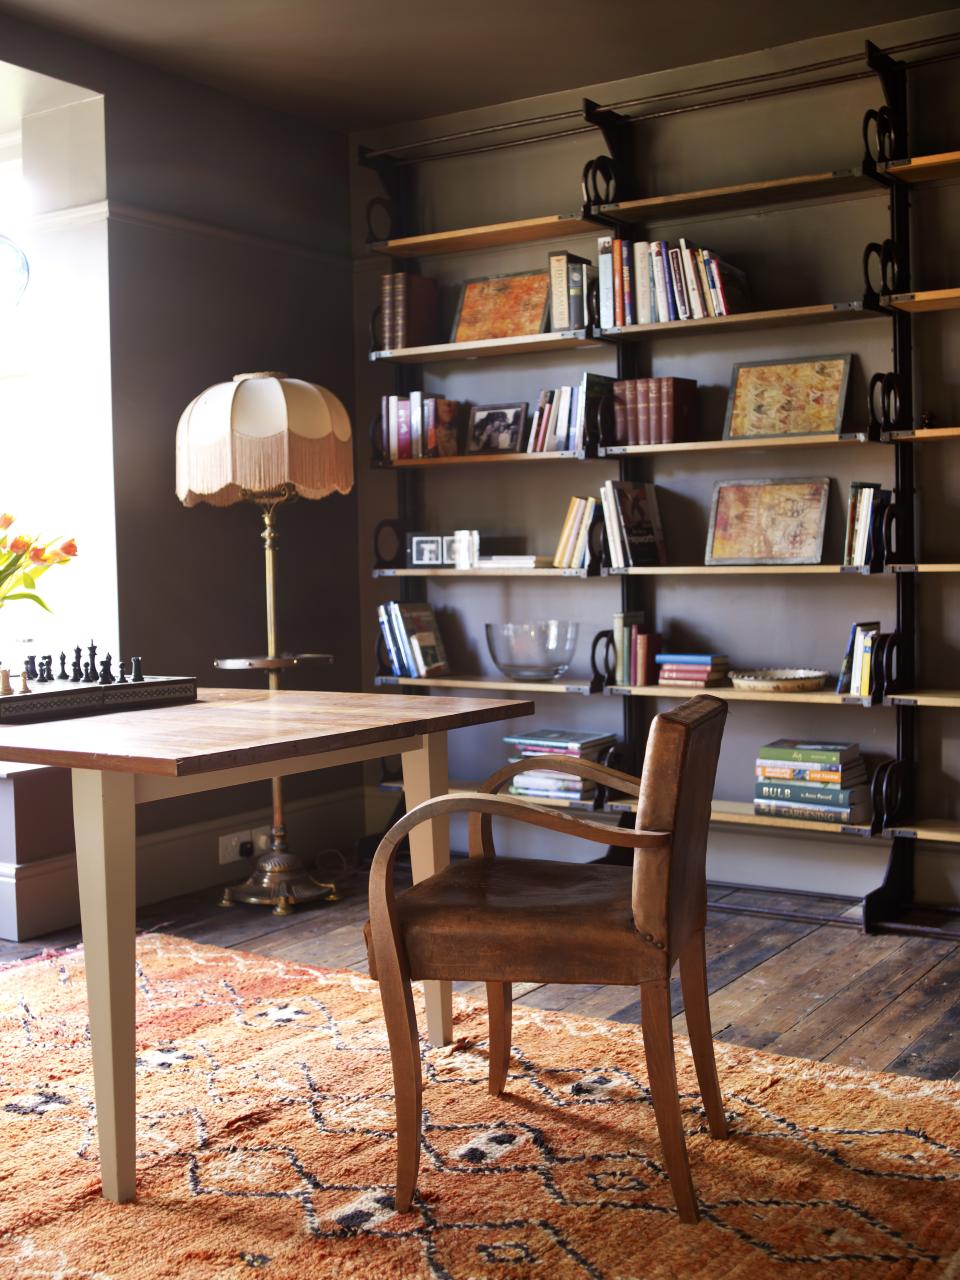 <p> Finding the perfectly sized antique or vintage bookcase for your study can be a challenge, particularly if the wall space available is large and you want to make the most of it.  </p> <p> Maria Speake of salvage expert Retrouvius employs a reuse before recycle approach, scouring the country for discarded gems that might be re-imagined in different formats. </p> <p> This fully-adjustable industrial shelving system – which can be configured in a number of ways – was reclaimed from an office and re-homed in this farmhouse, where it beautifully complements the timeless feel. </p>